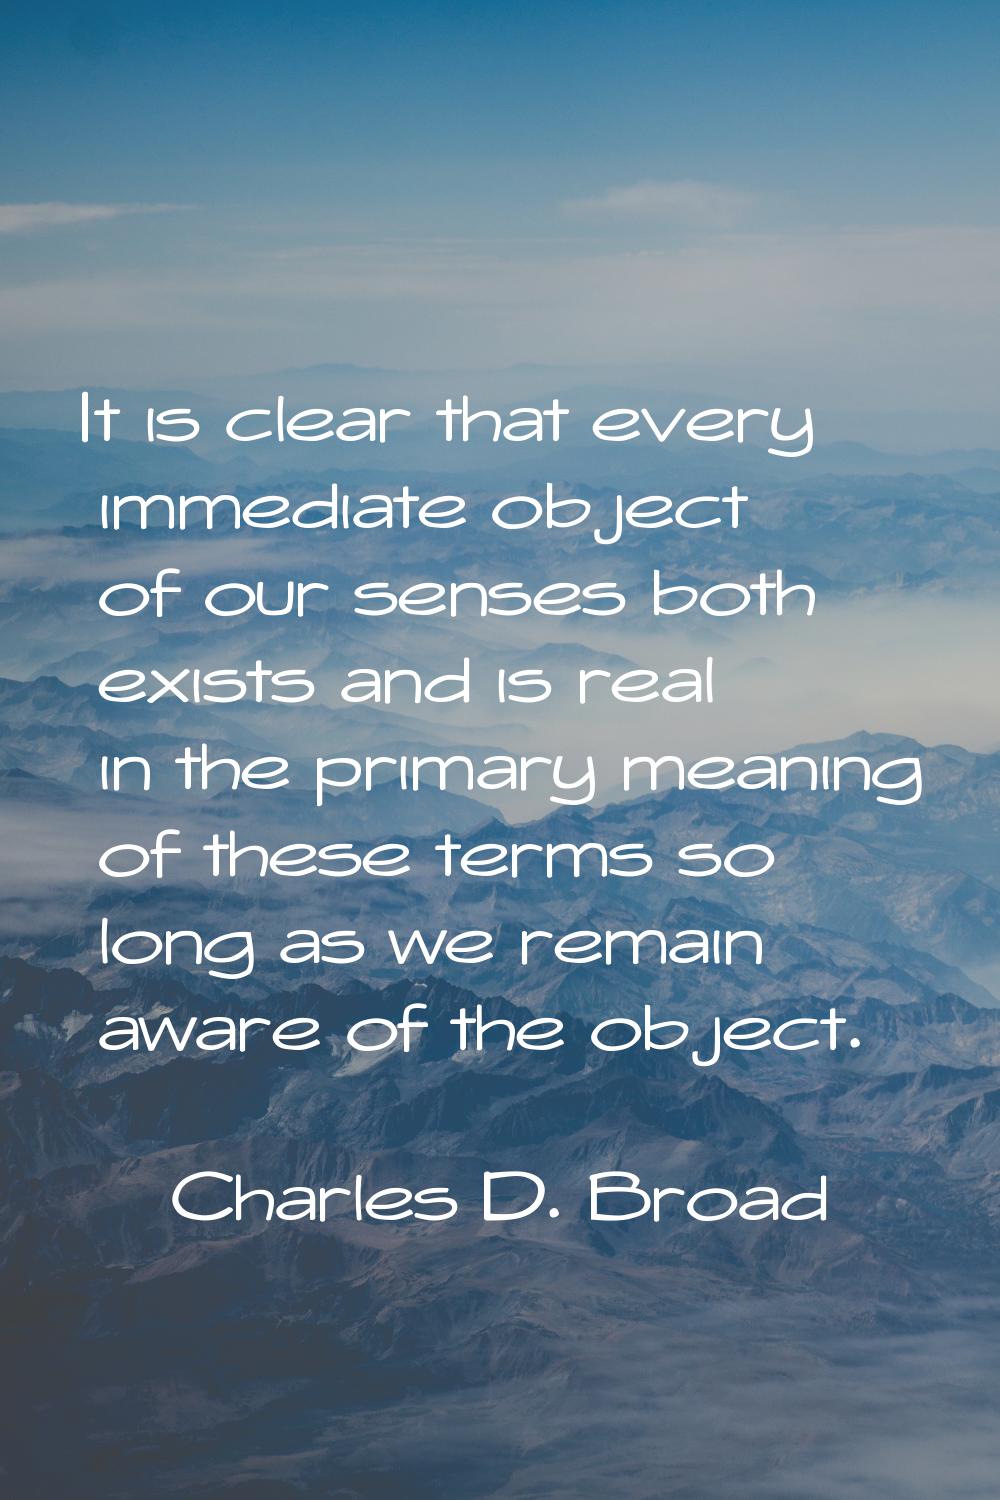 It is clear that every immediate object of our senses both exists and is real in the primary meanin